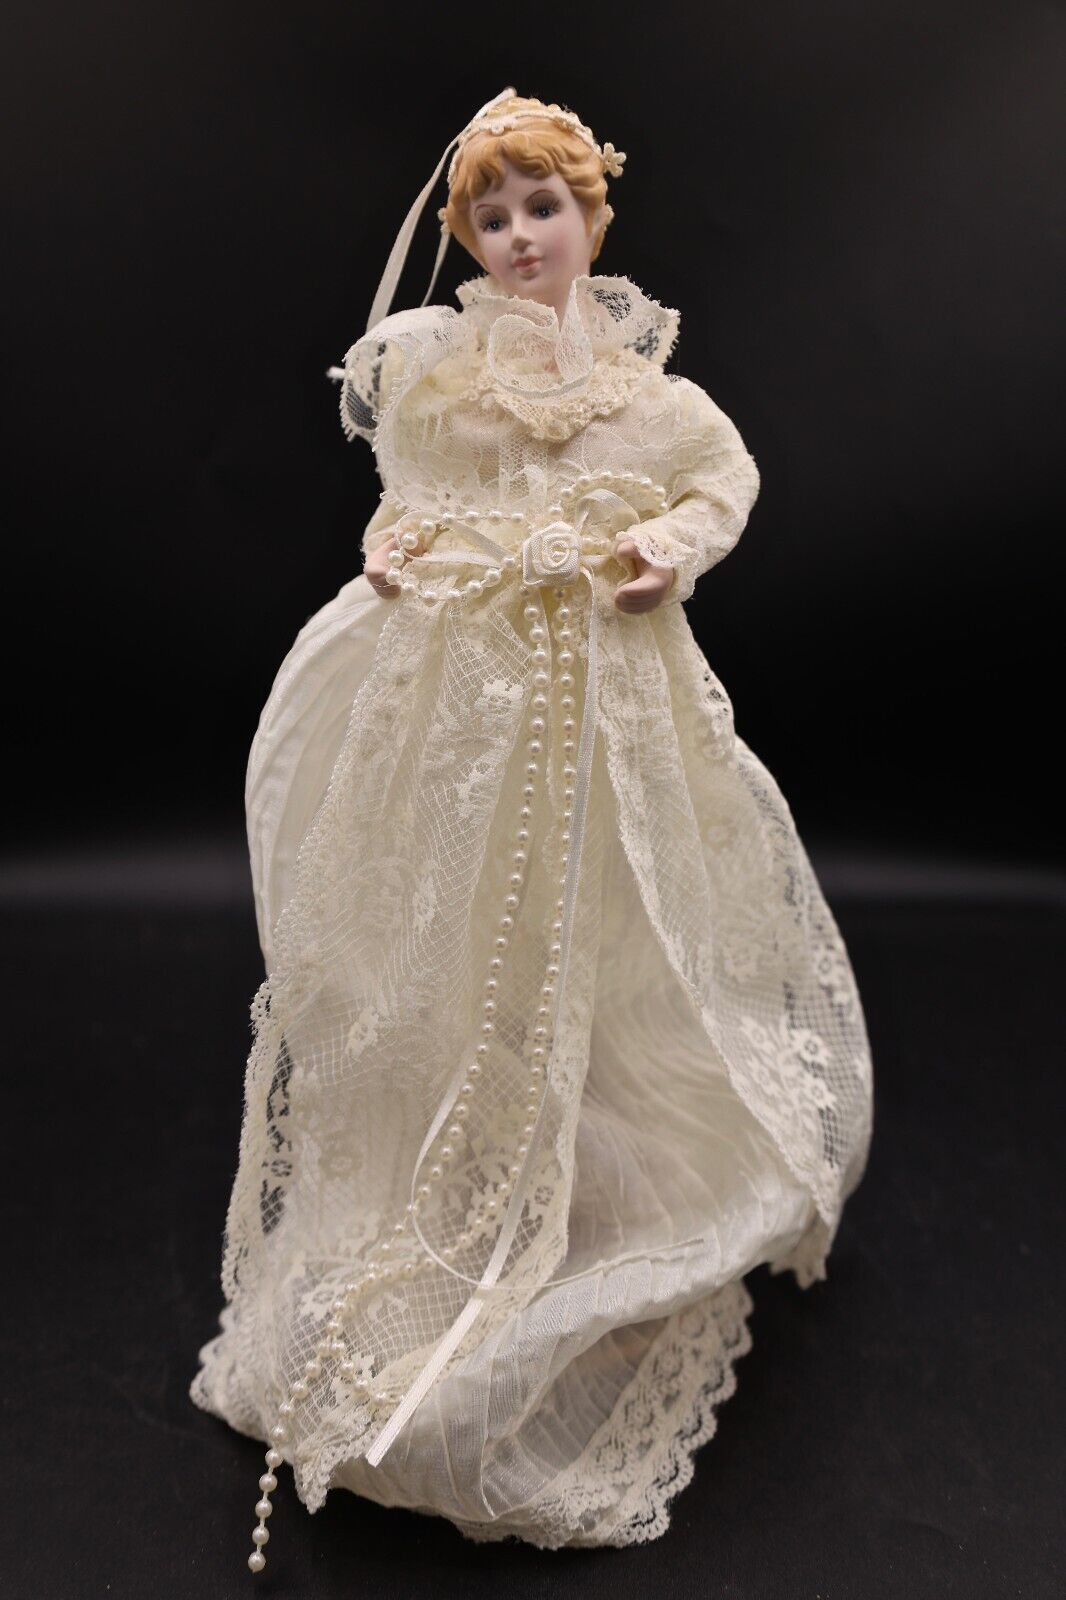 Three Victorian style Porcelain Bisque Doll Head and Hands Dressed in Lace Gown